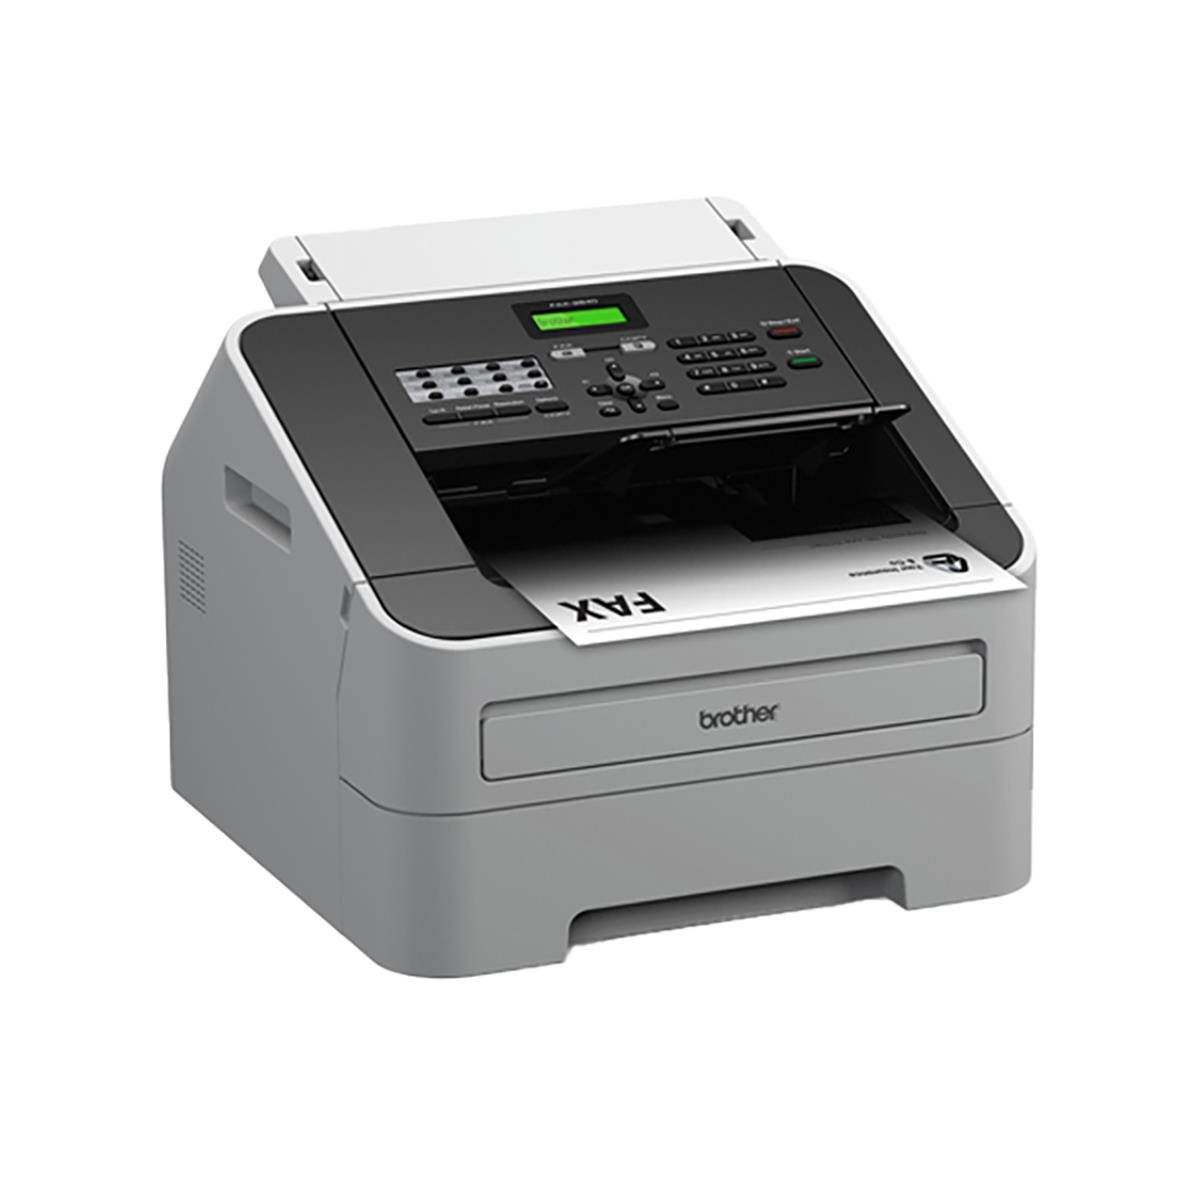 Fax Brother Fax-2840 Laser FAX2840ZW1 35200001